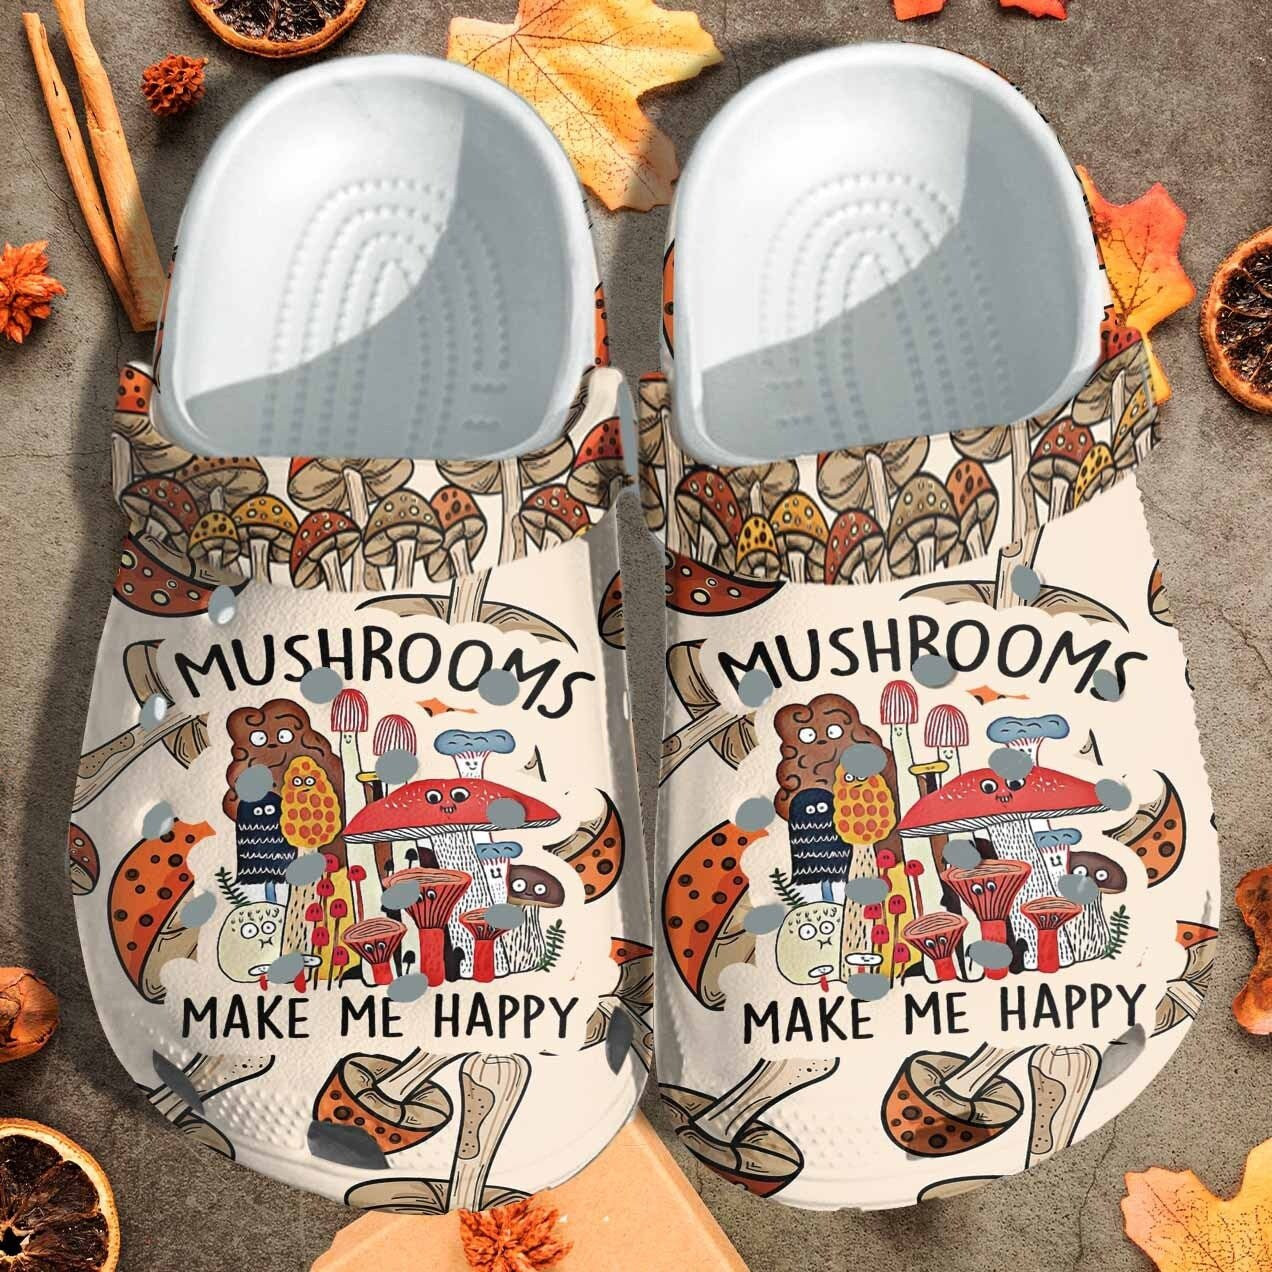 Happy Mushrooms Crocs Shoes Clogs Gift For Boy Girl - Make Me Happy Custom Crocs Shoes Clogs Birthday Gift For Son Daughter